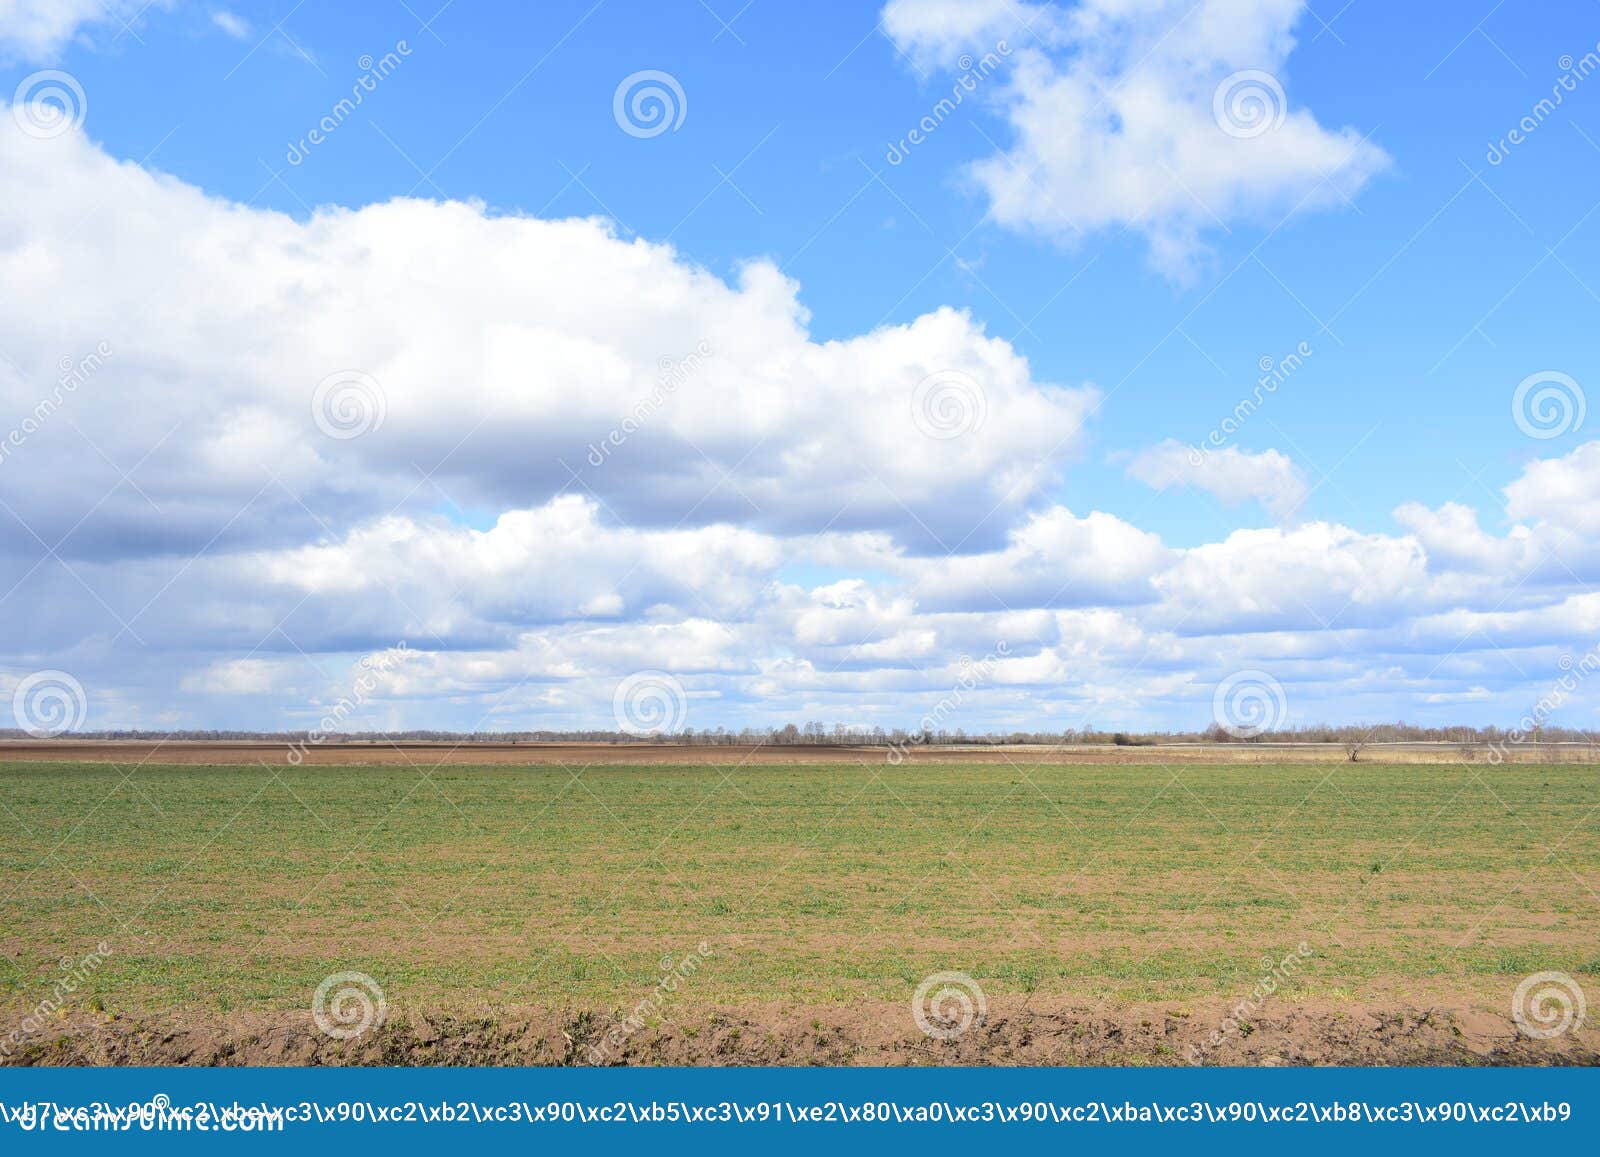 blue sky. clouds over the field. in the distance, the forest and the village. a large field of young grass, boundless. agricultura